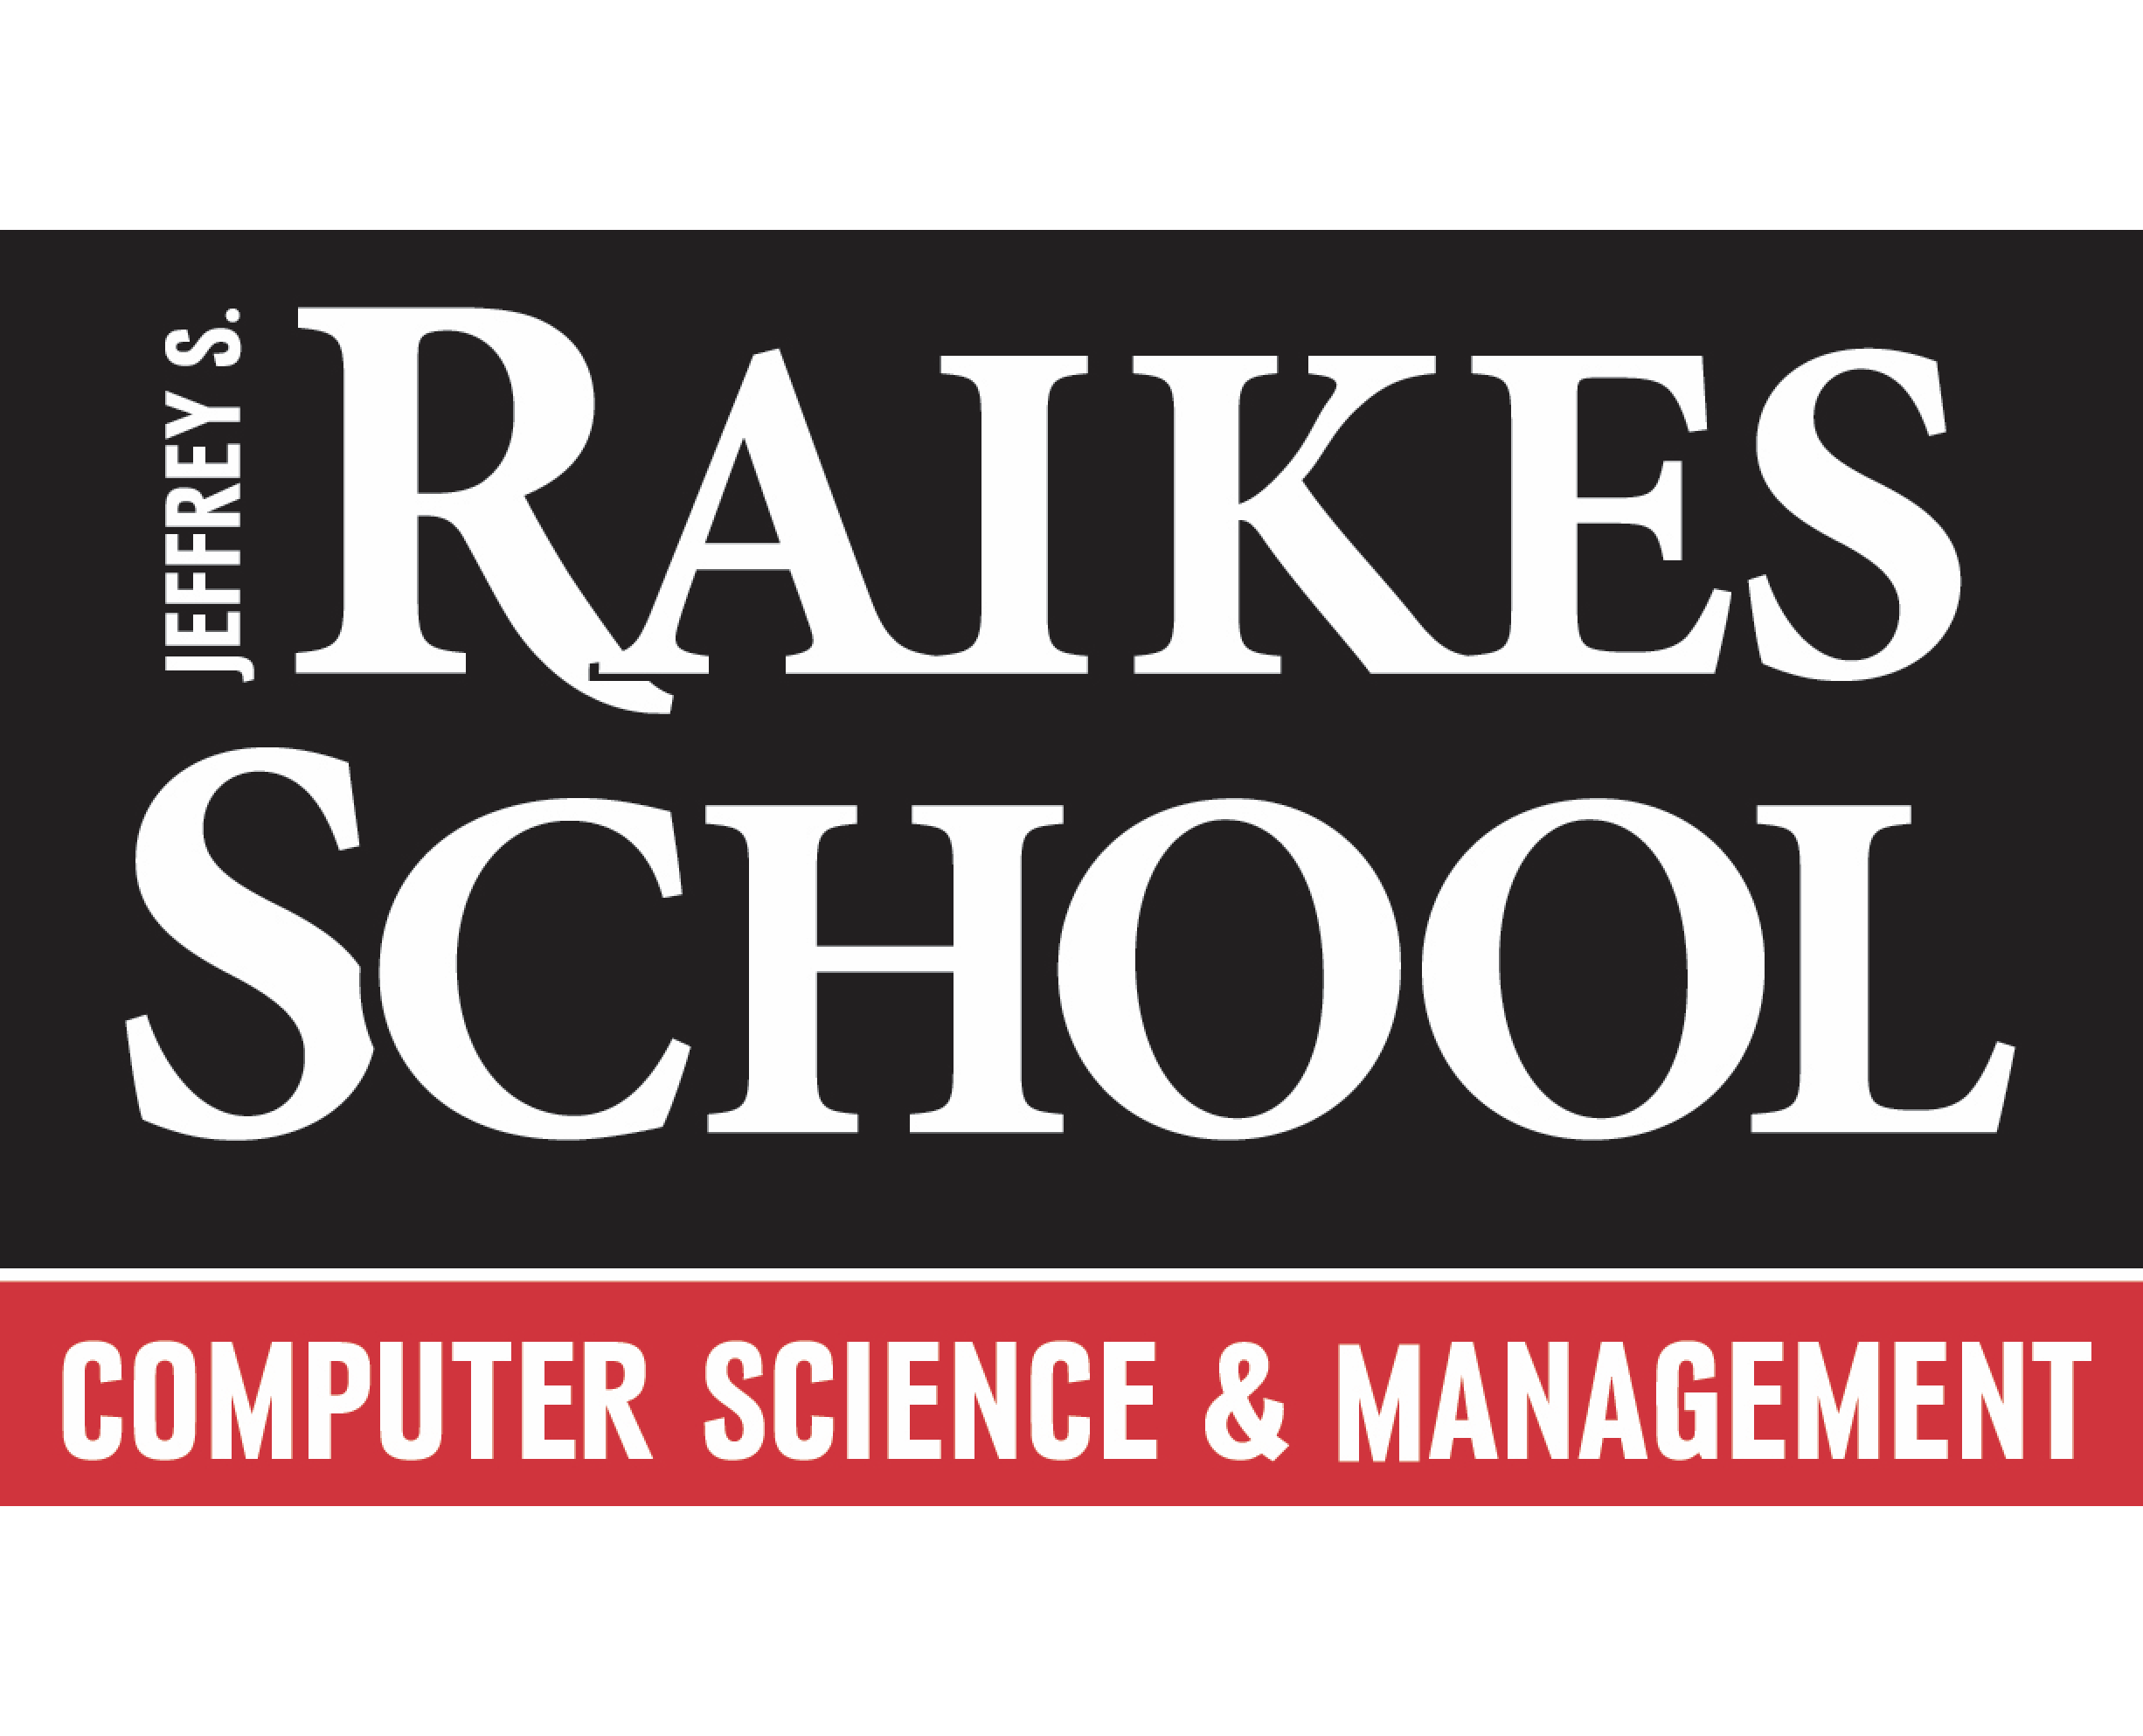 The Jeffrey S. Raikes School of Computer Science and Management